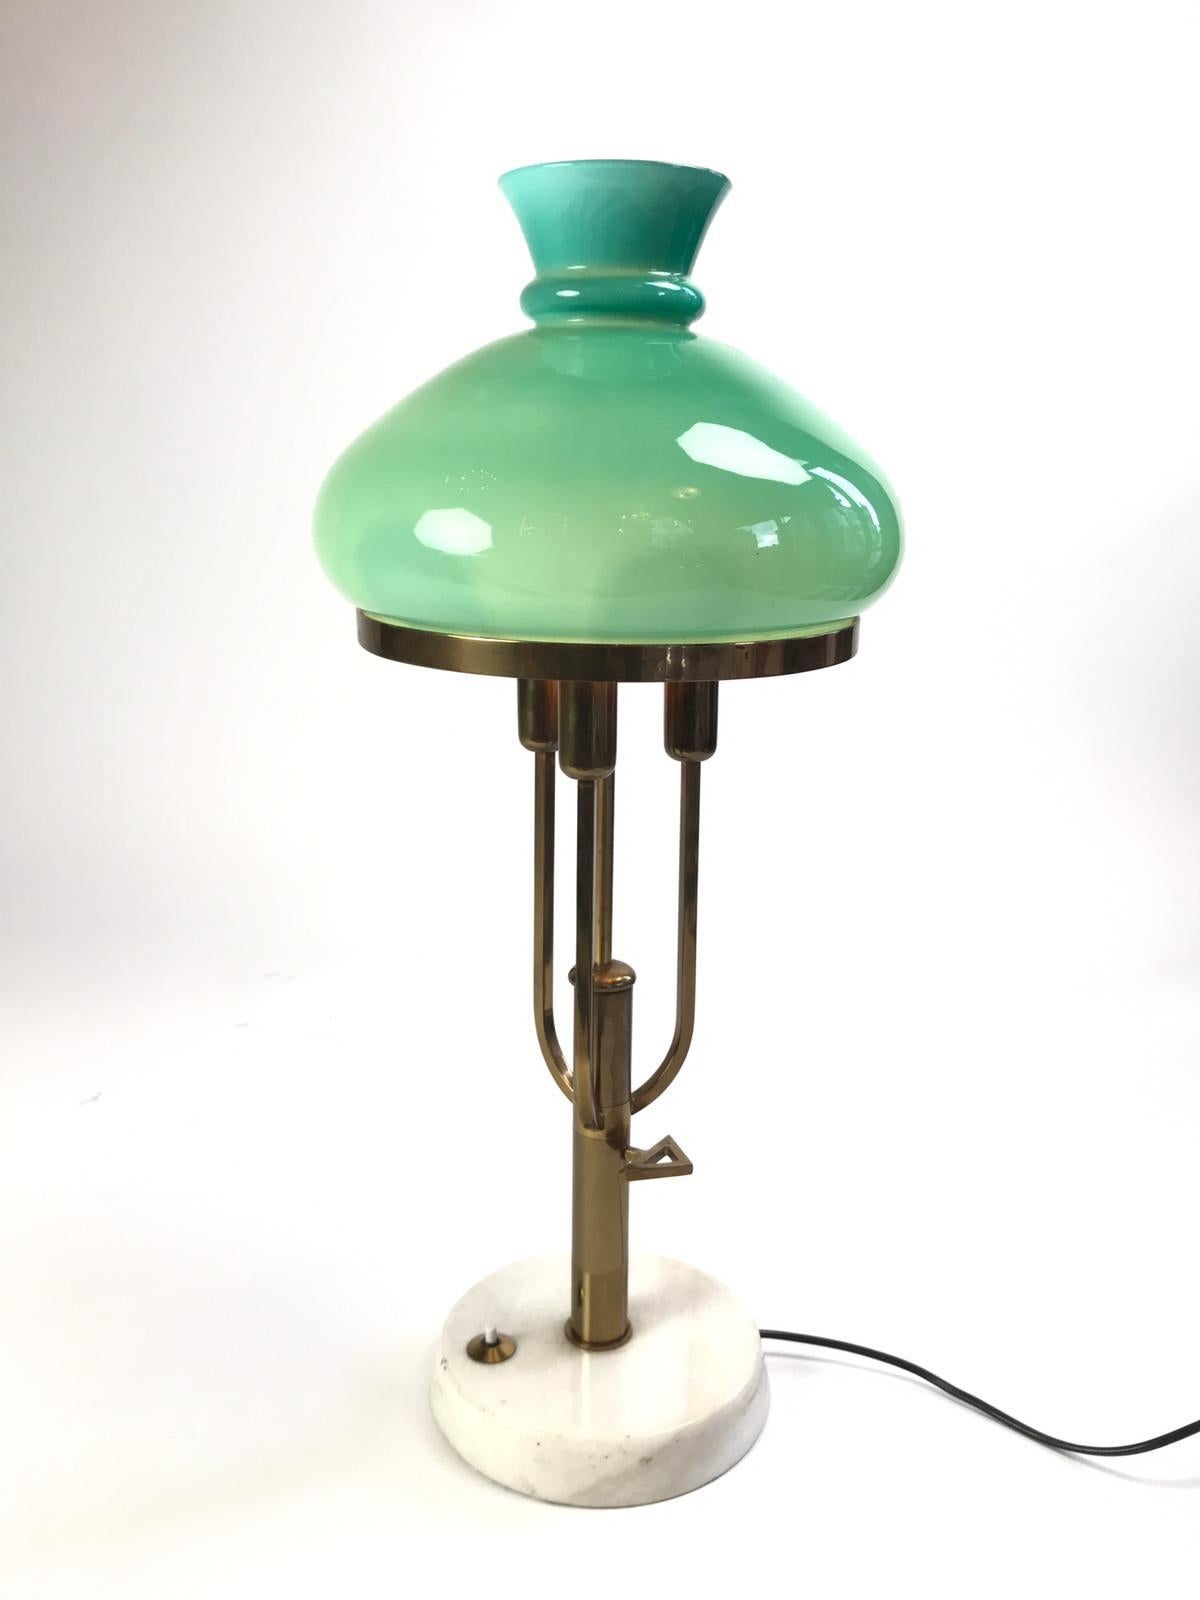 A lovely Italian vintage table lamp comprising of 3 lamps housed in a green hand blown Murano glass shade with a brass stand and marble base. The design is attributed to Ignazio Gardella.